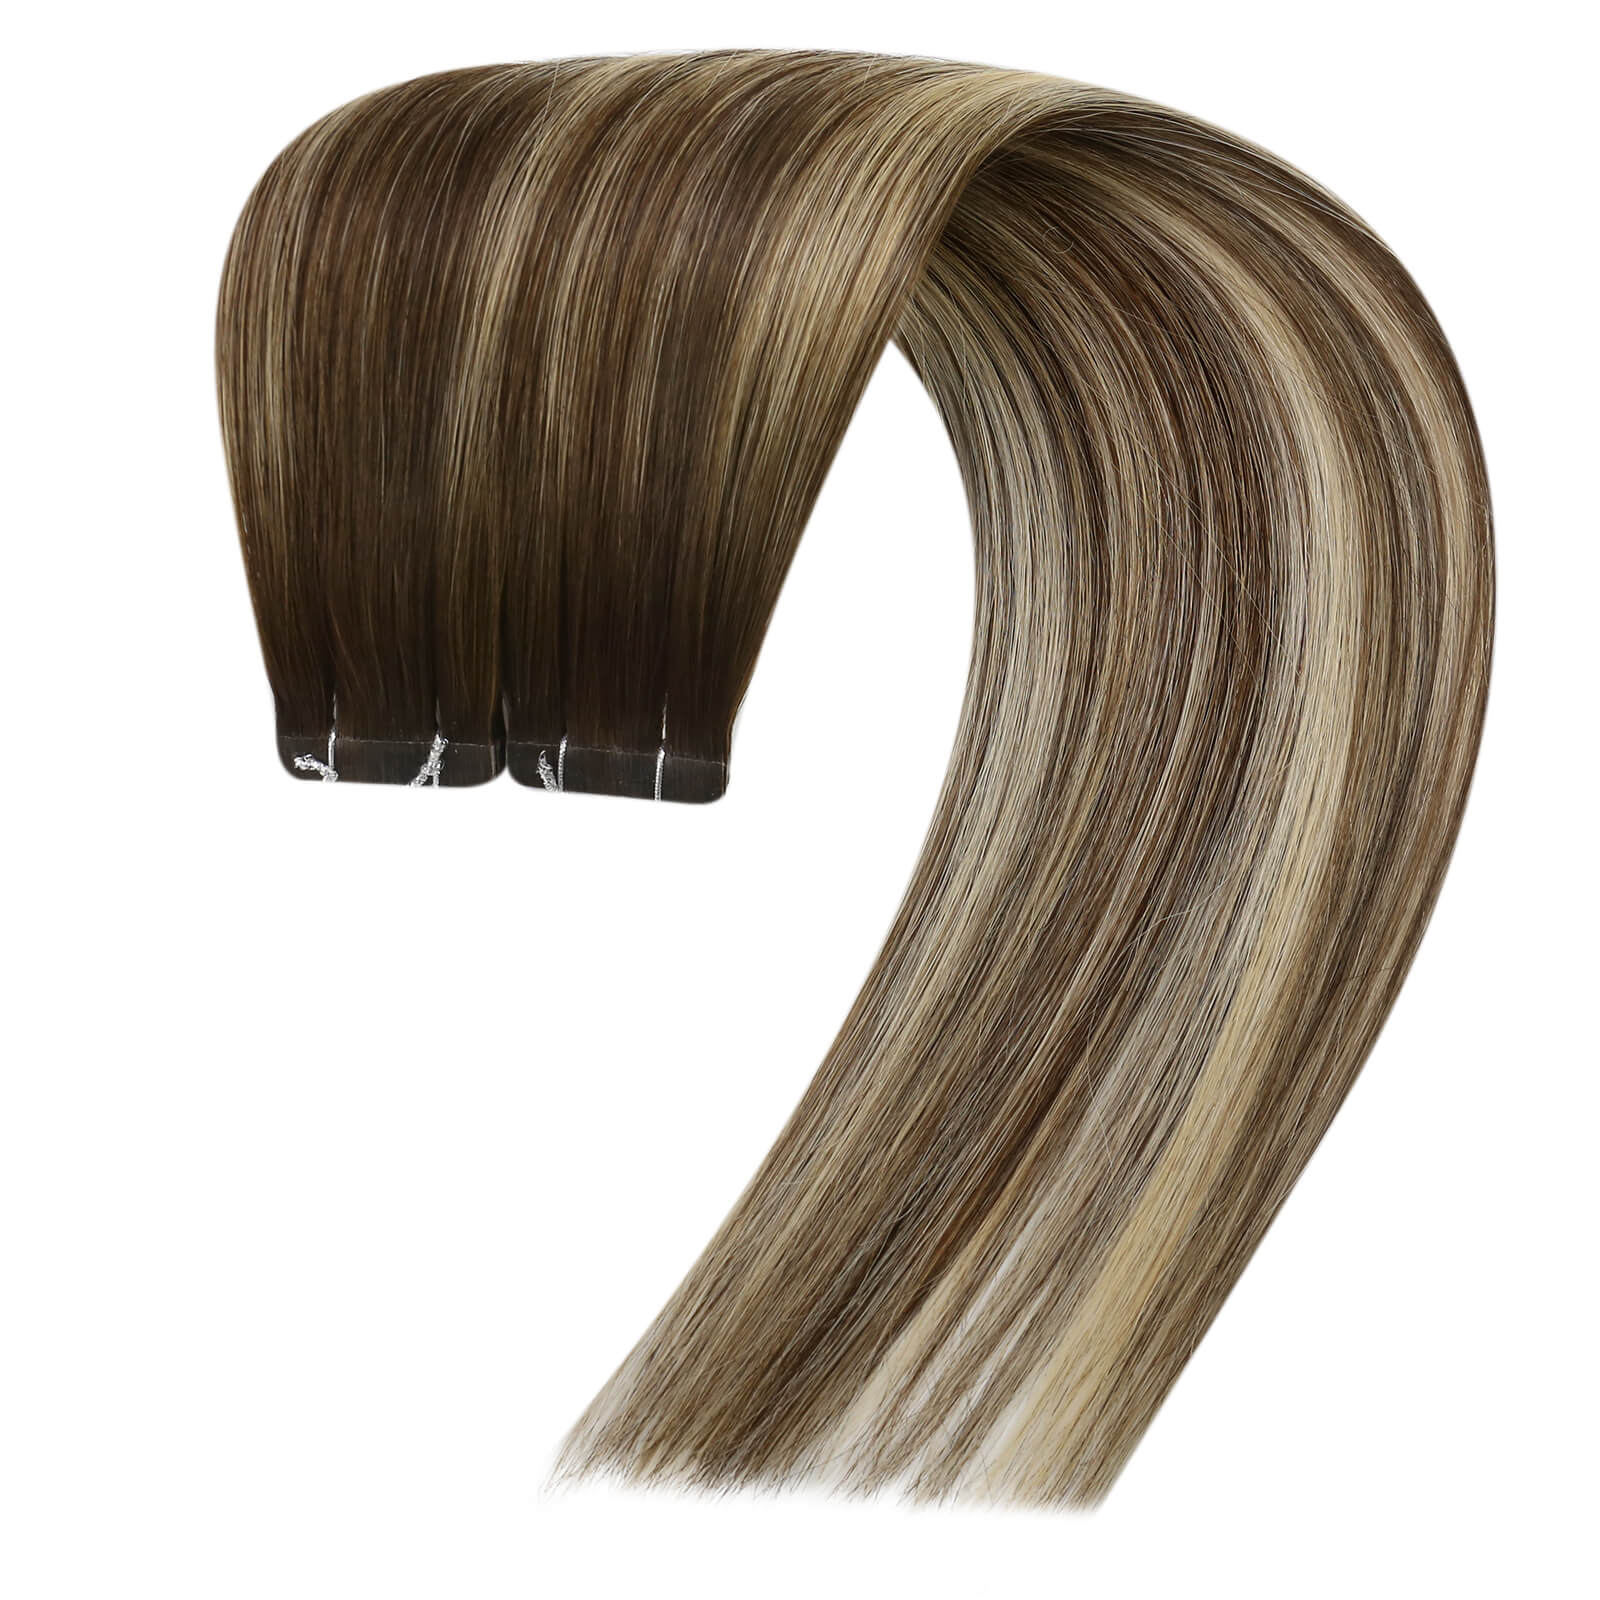 tape in hair extentions real hair tape in extensions tape-in hair extensions seamless tape in hair extensions